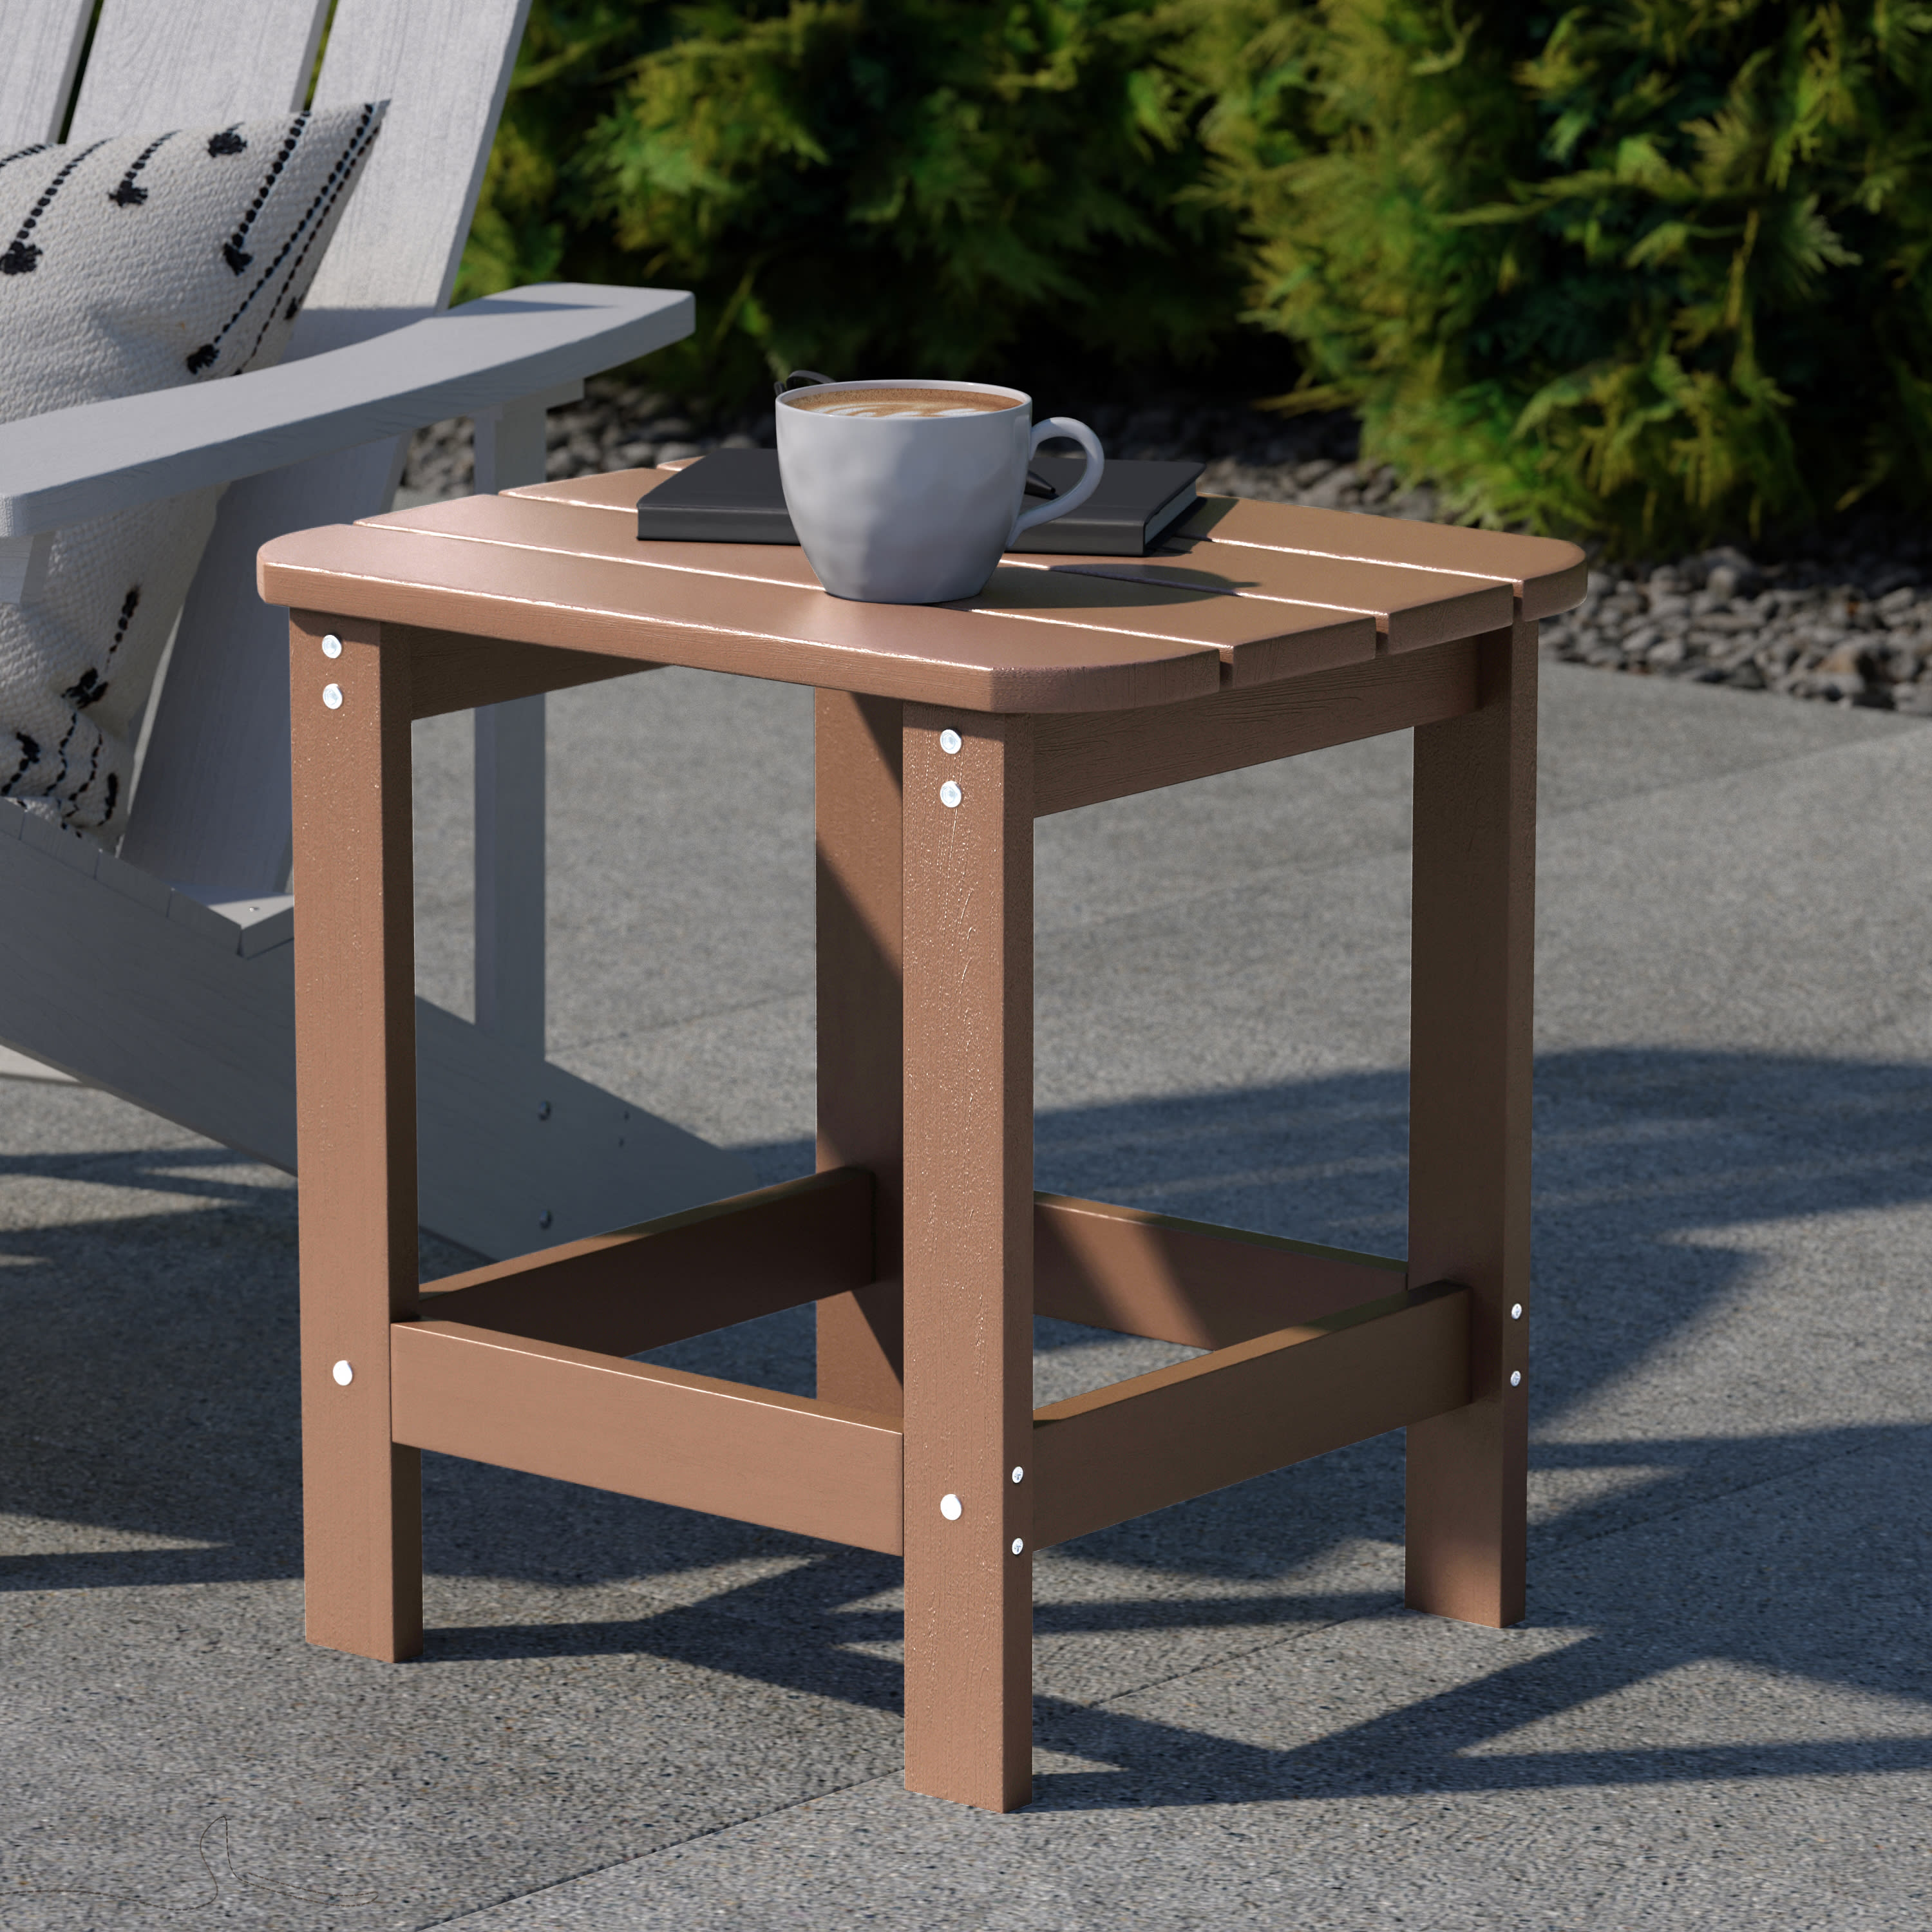 Flash Furniture Charlestown All-Weather Poly Resin Wood Commercial Grade Adirondack Side Table in Natural Cedar - image 2 of 11